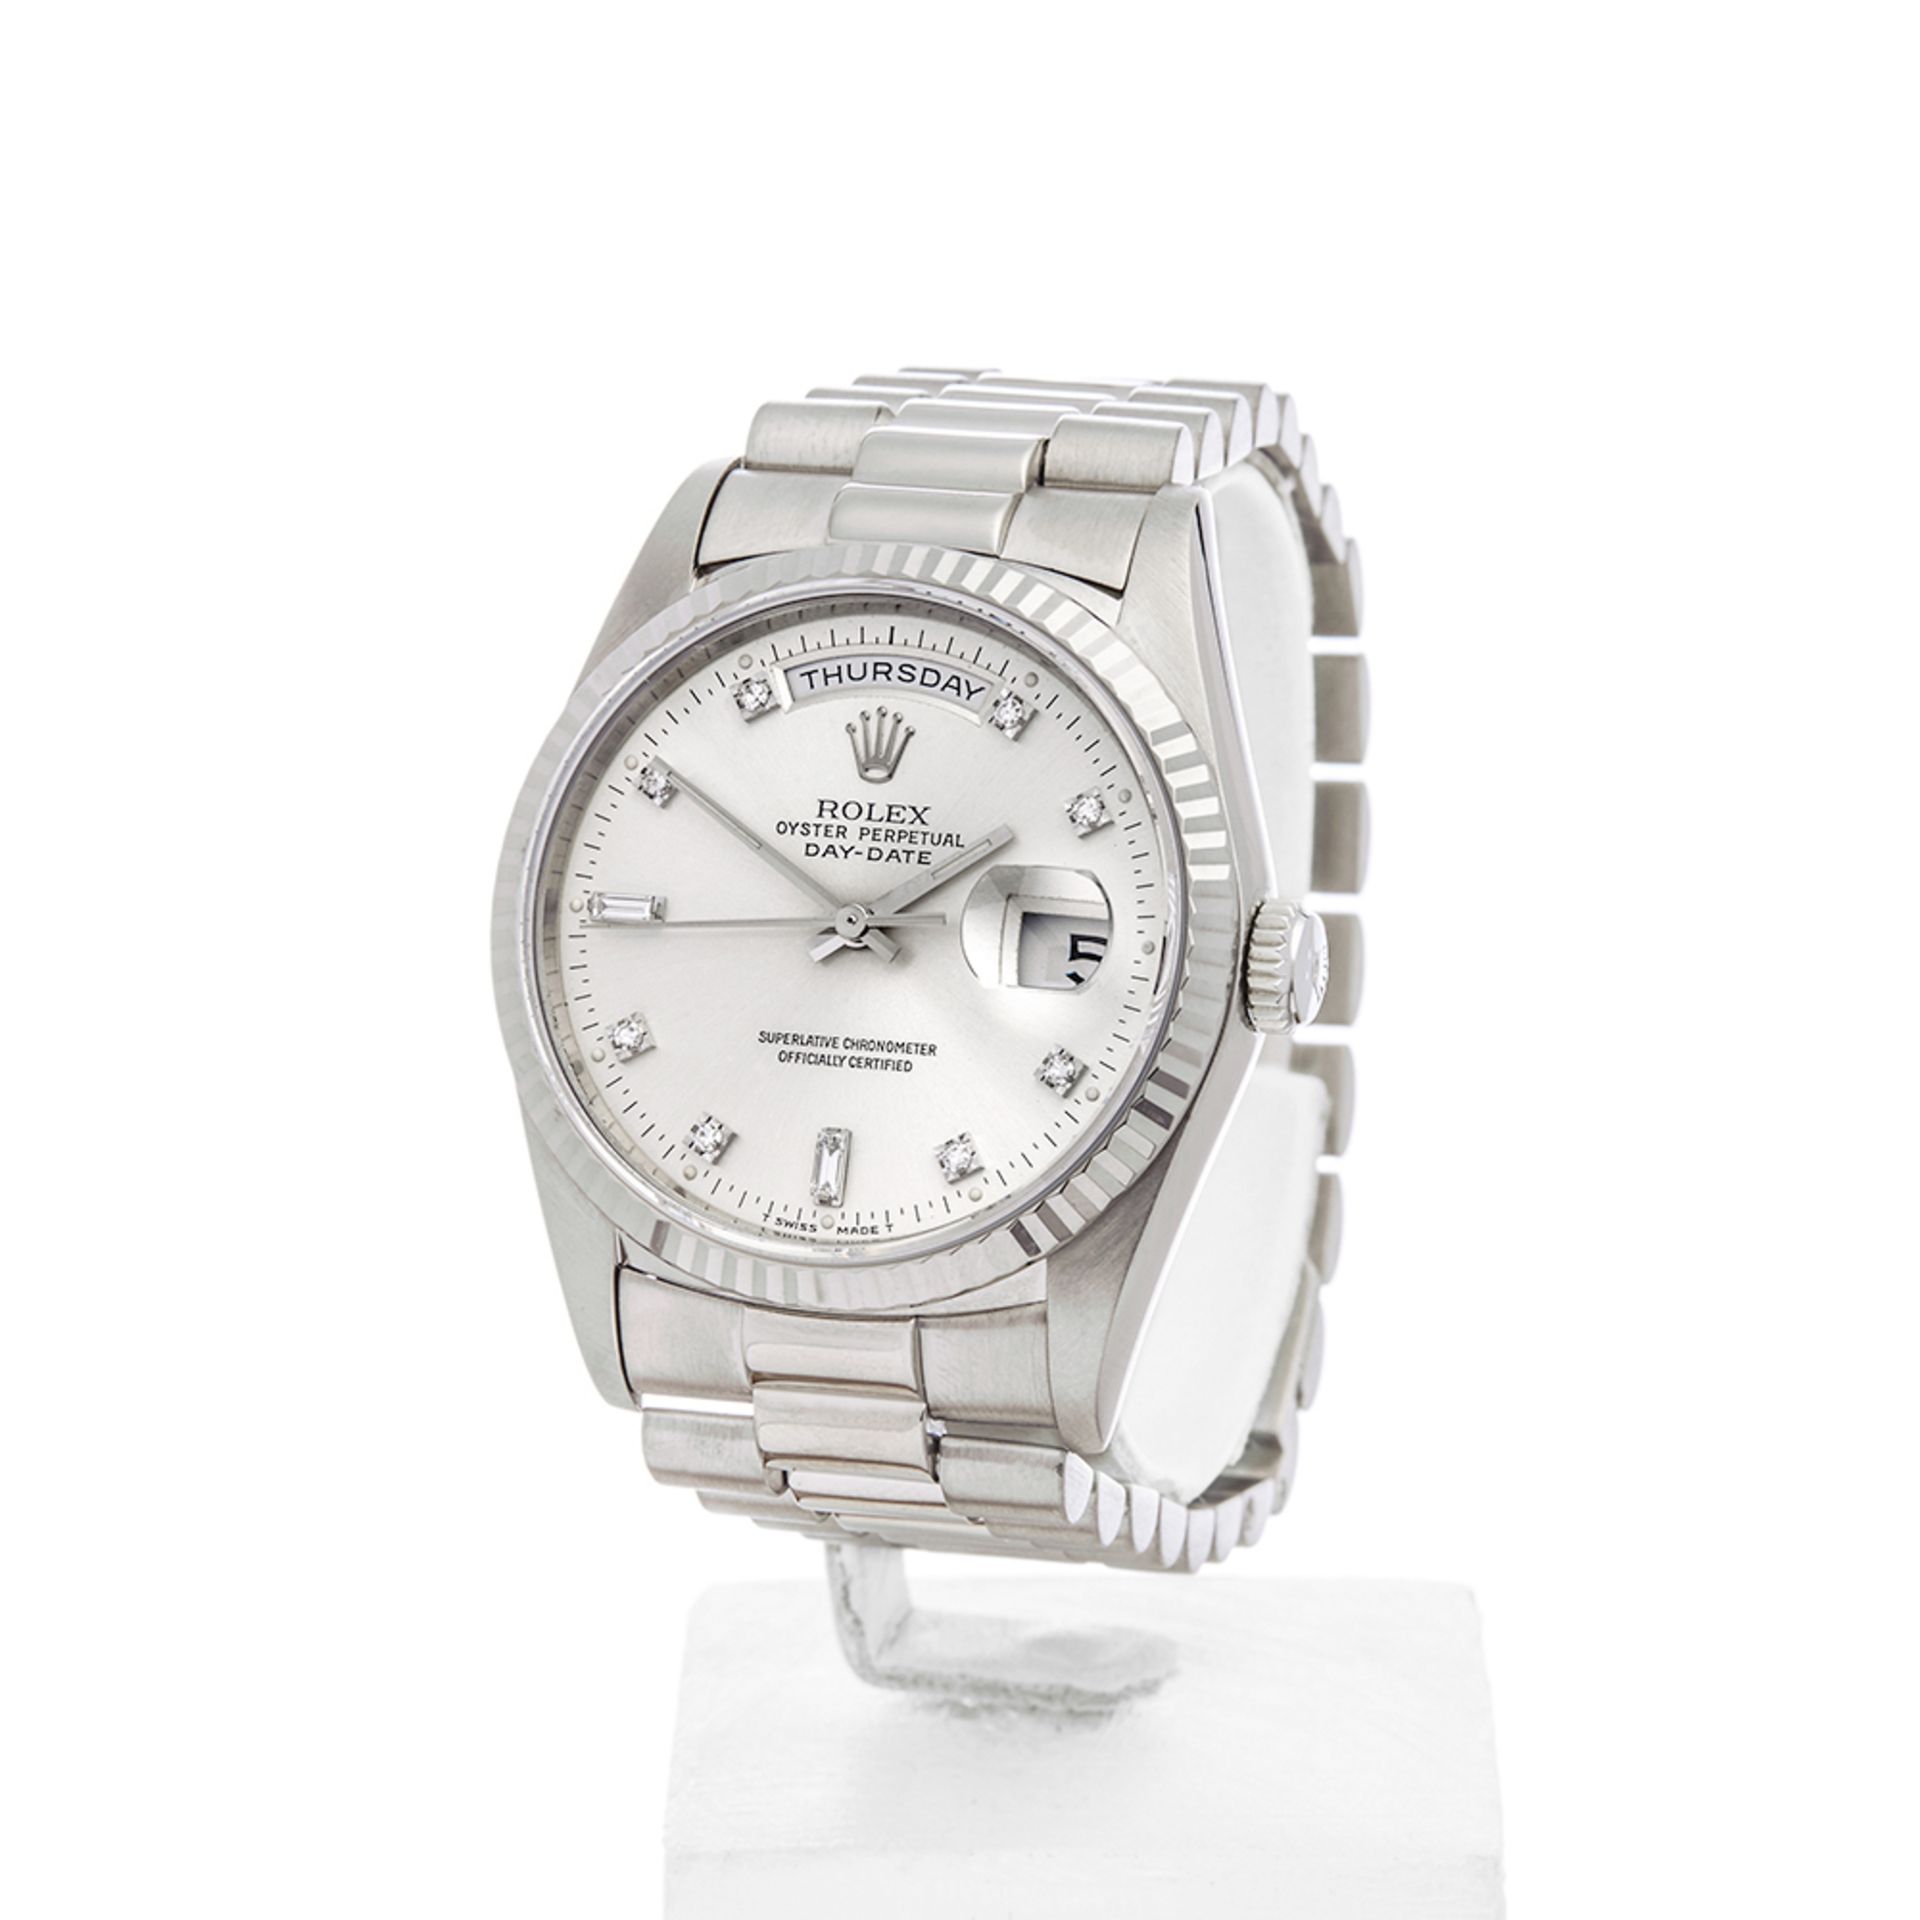 Day-Date 36mm 18K White Gold - 18239 - Image 3 of 7